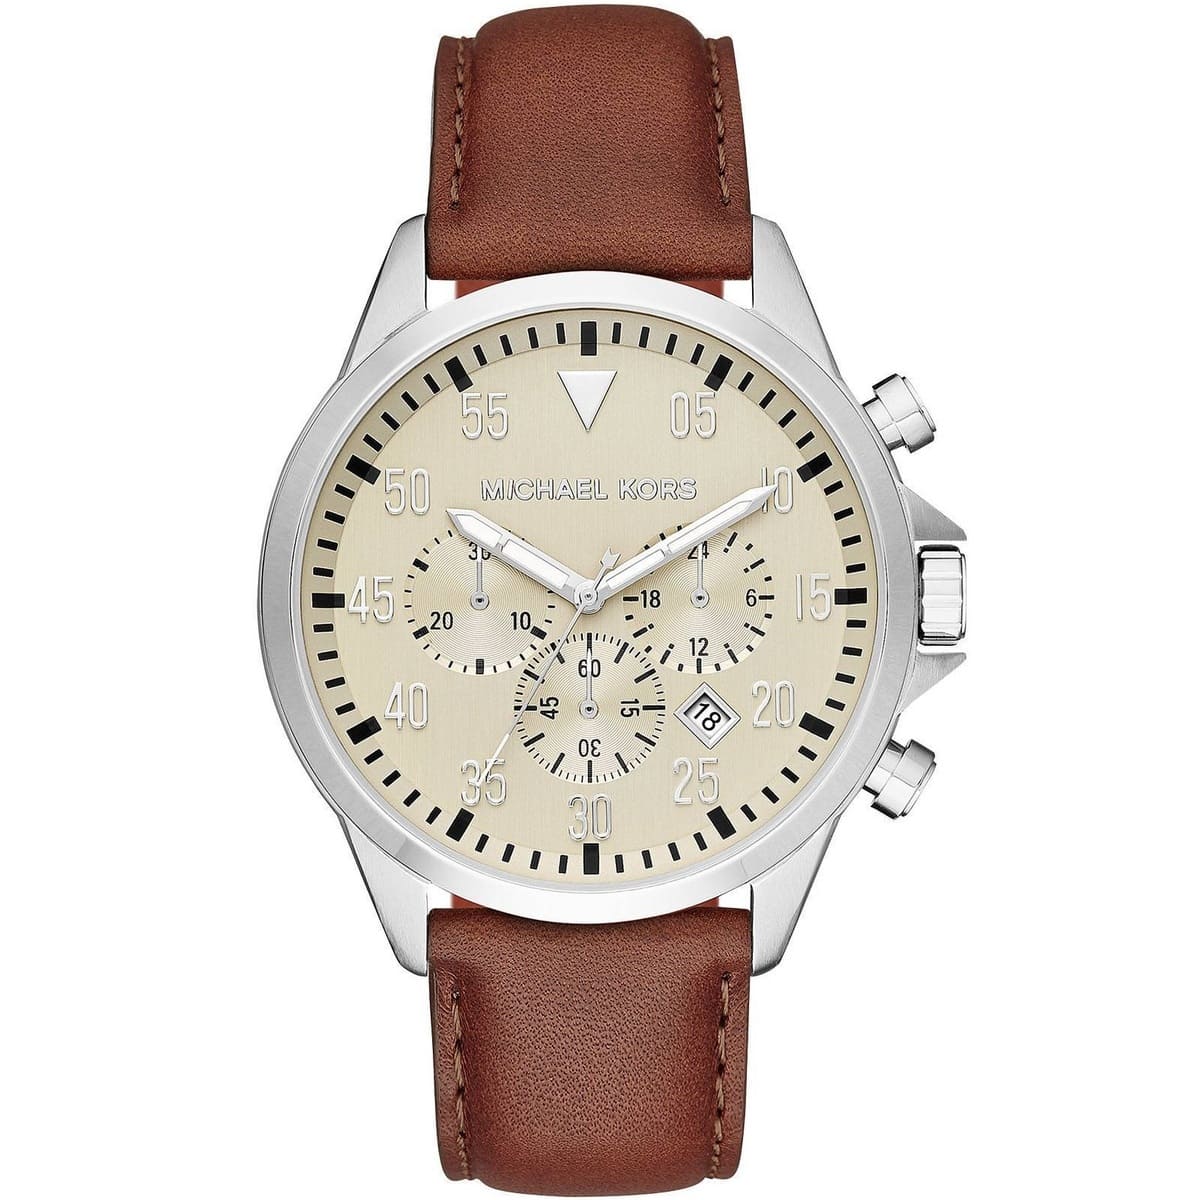 Michael Kors Watch Mens Mens Fashion Watches  Accessories Watches on  Carousell